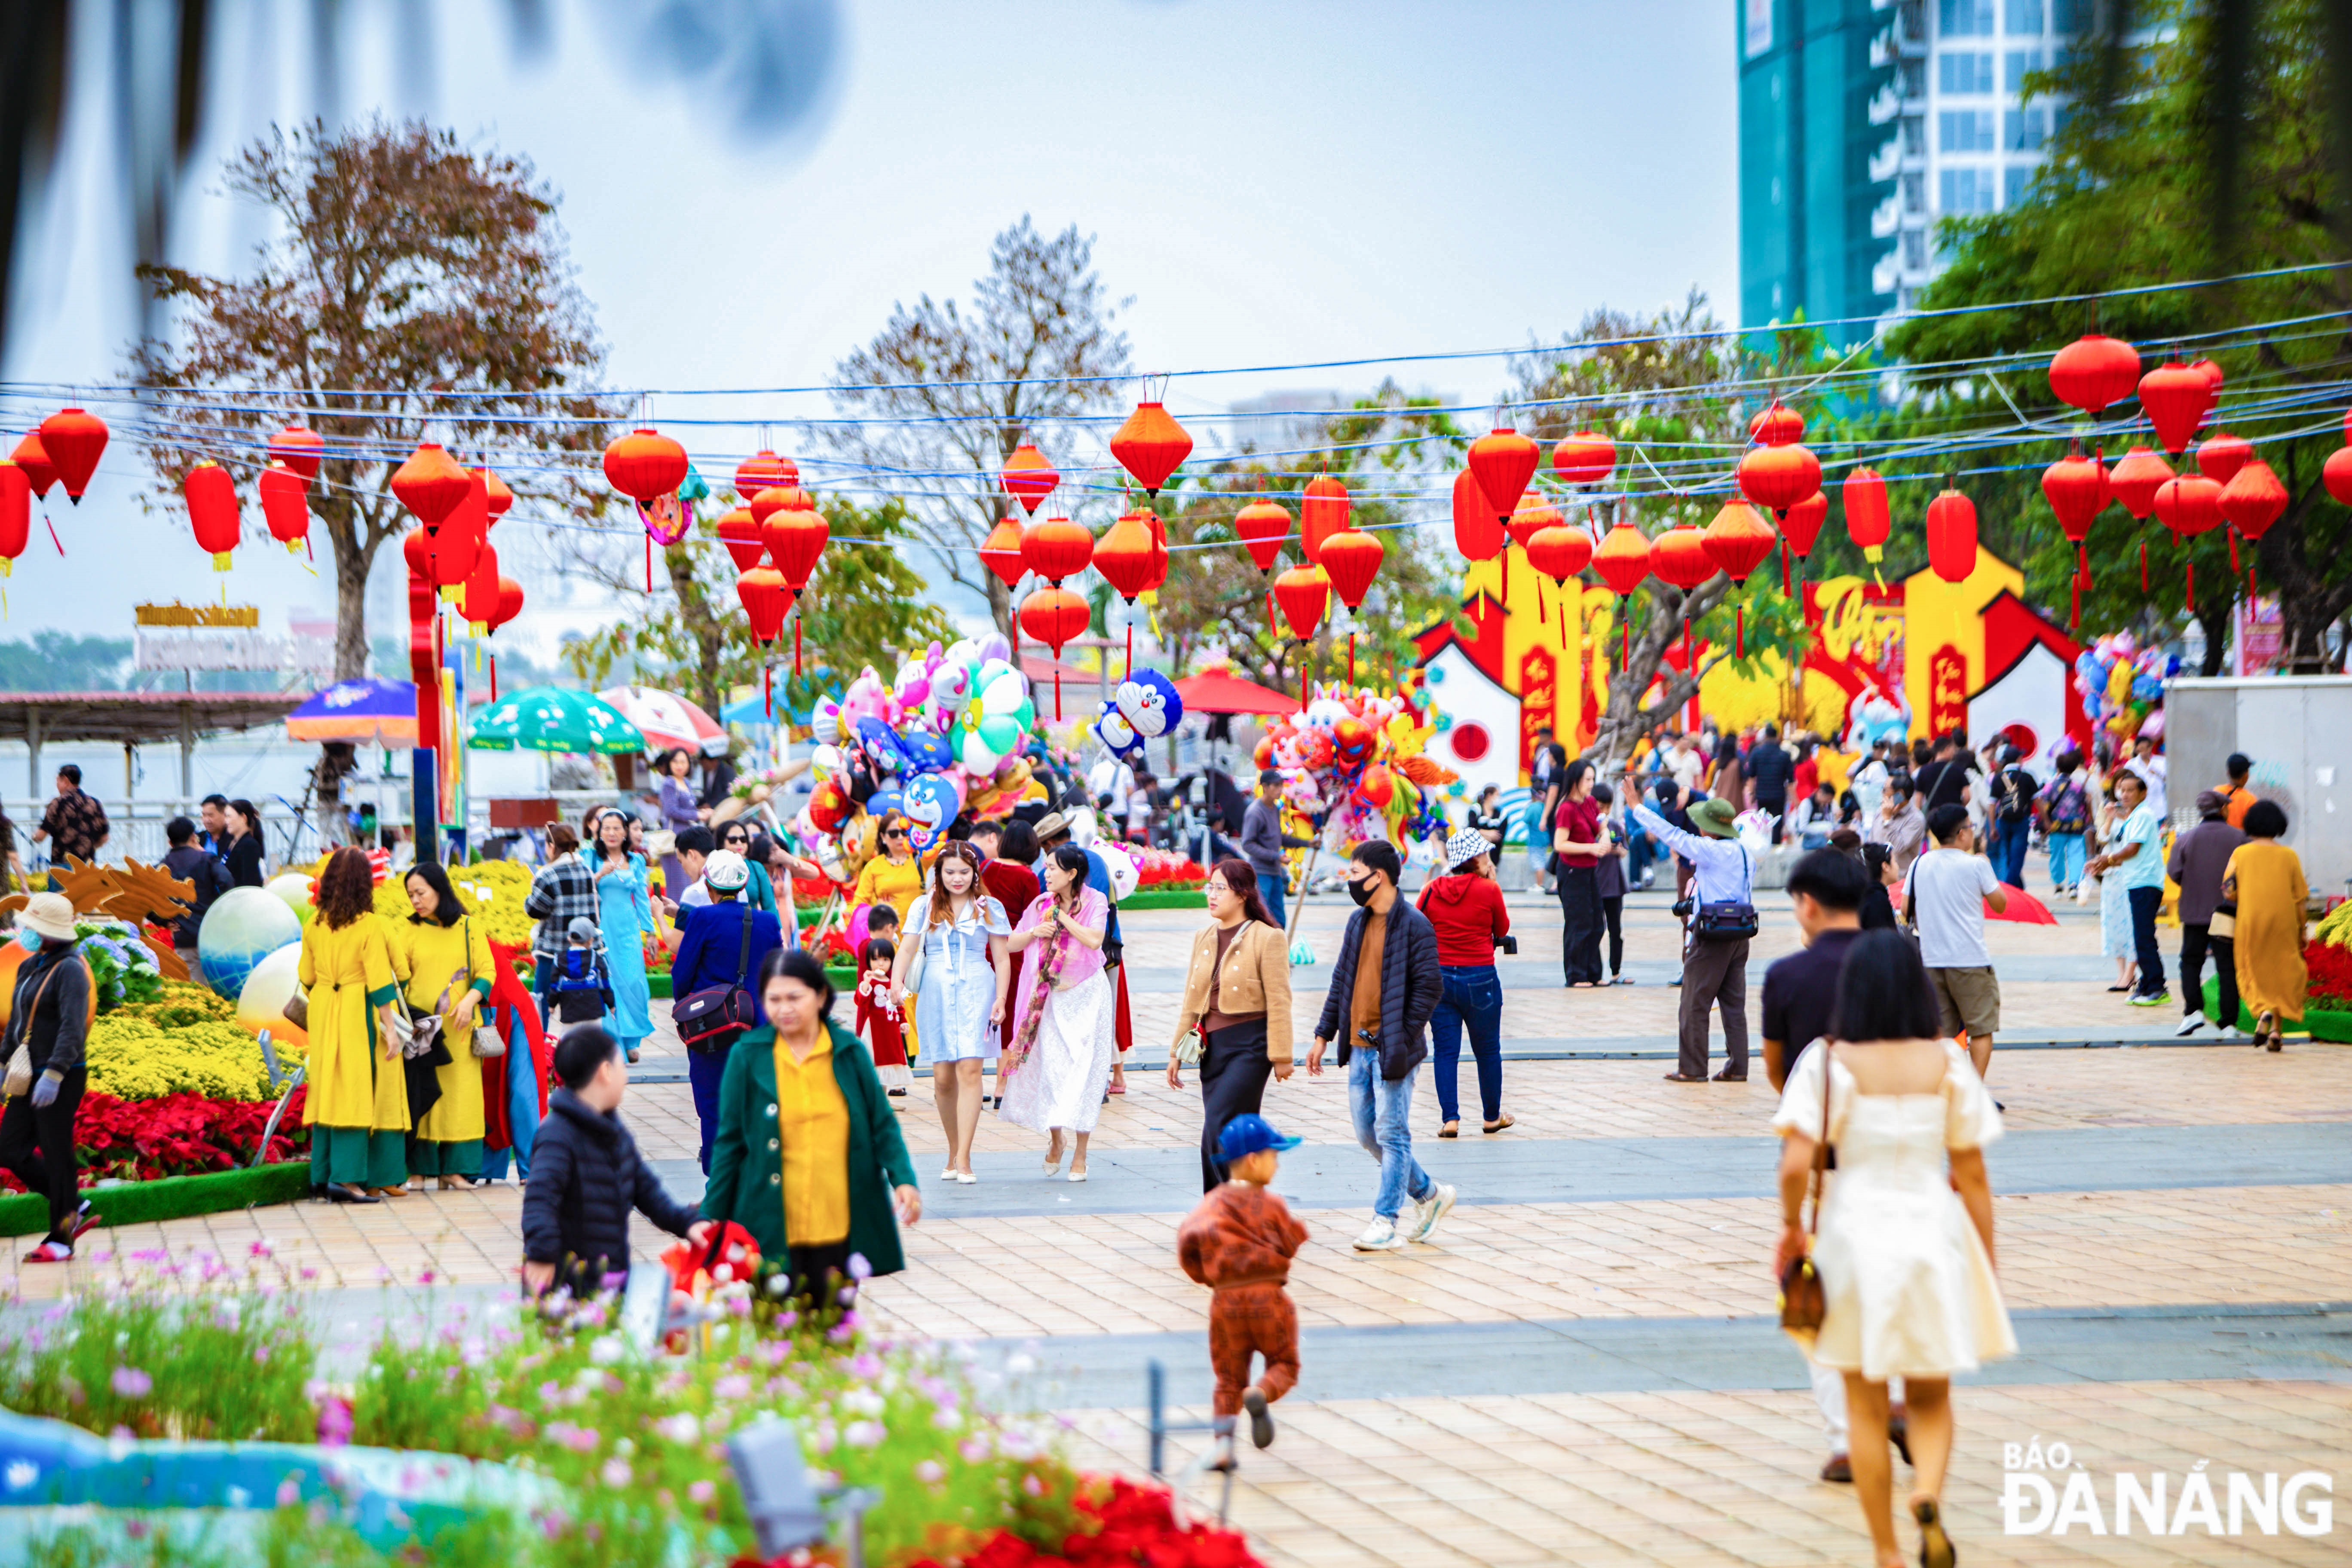 A large number of visitors to spring flower streets on Thursday (the 6th day of Tet).